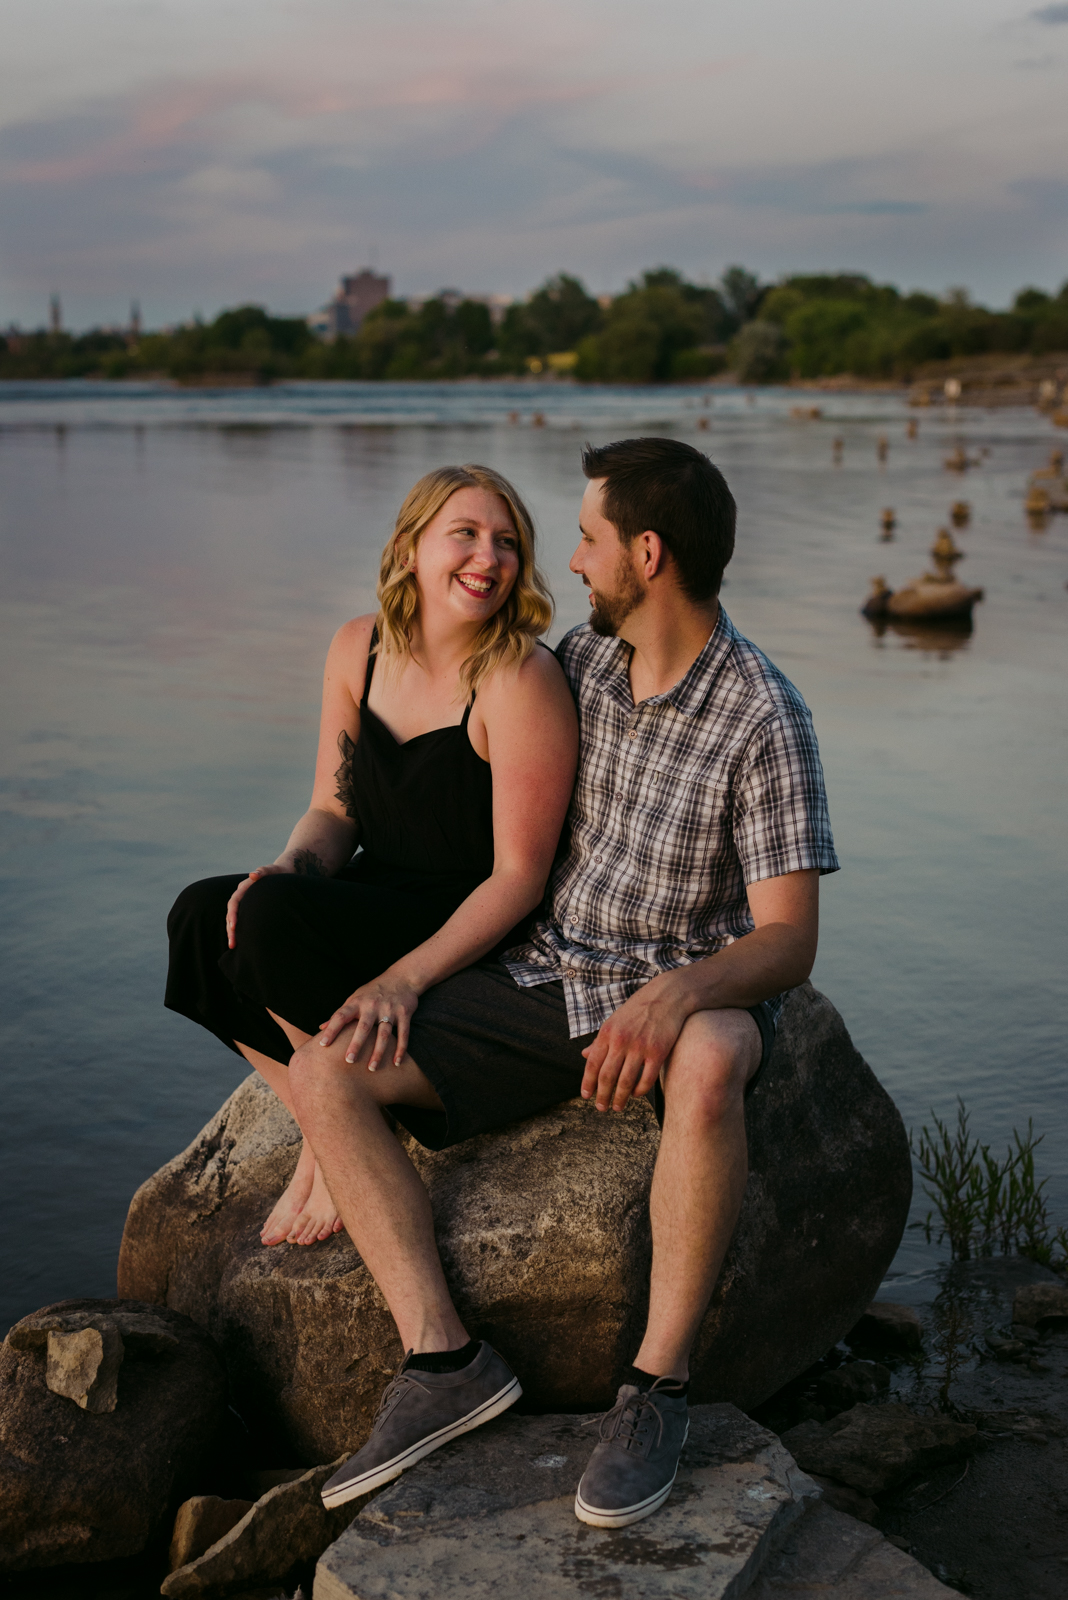 engaged couple sitting on the rocks by the water at sunset laughing